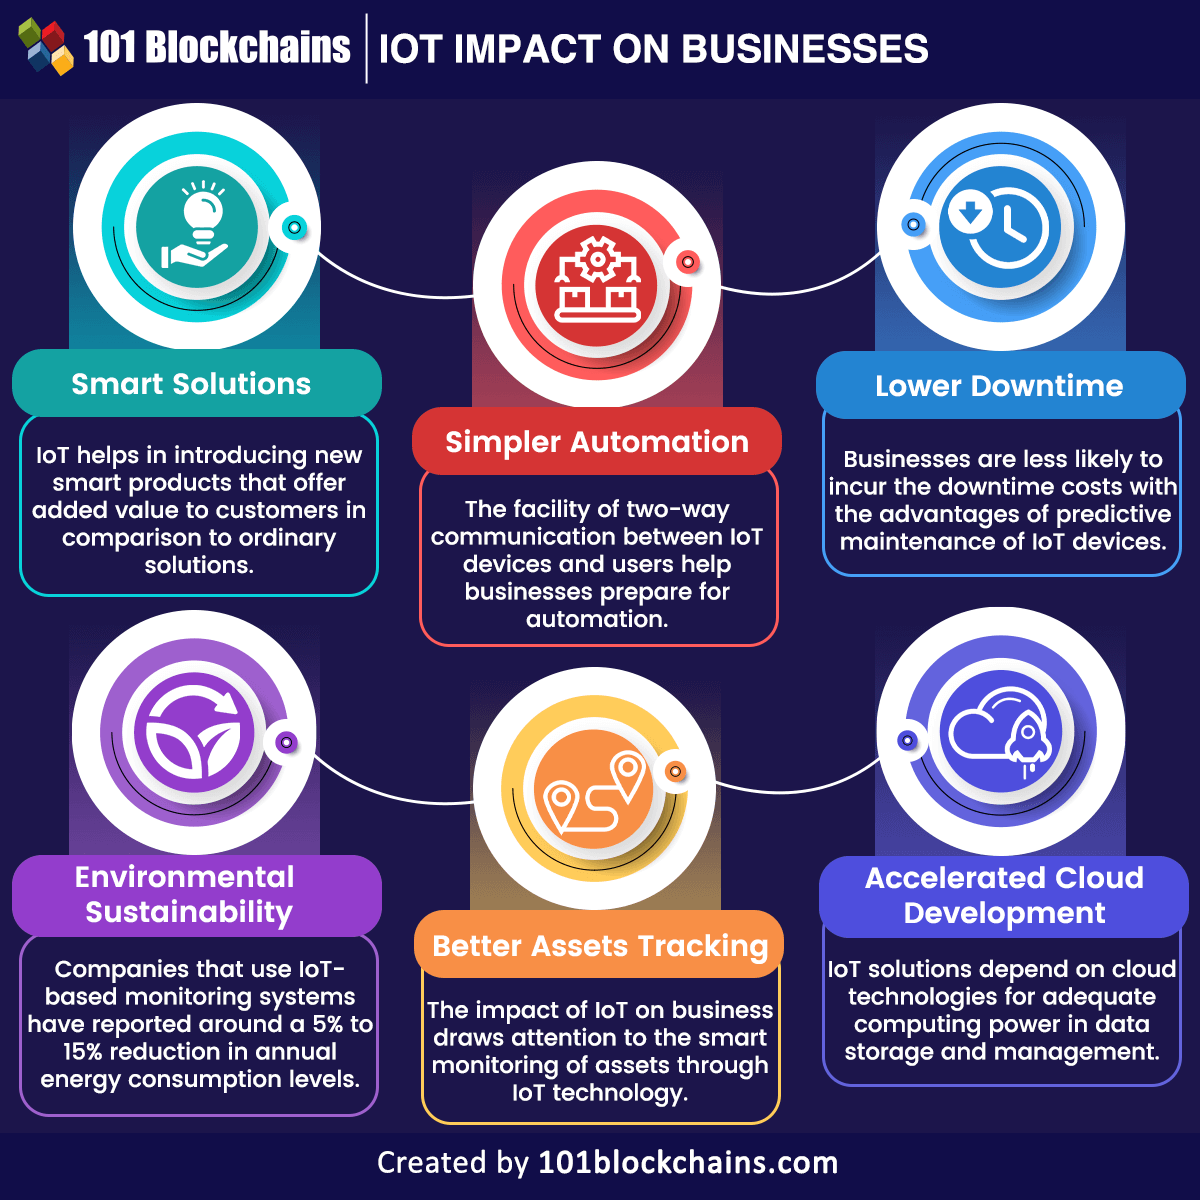 IoT Impact on Businesses